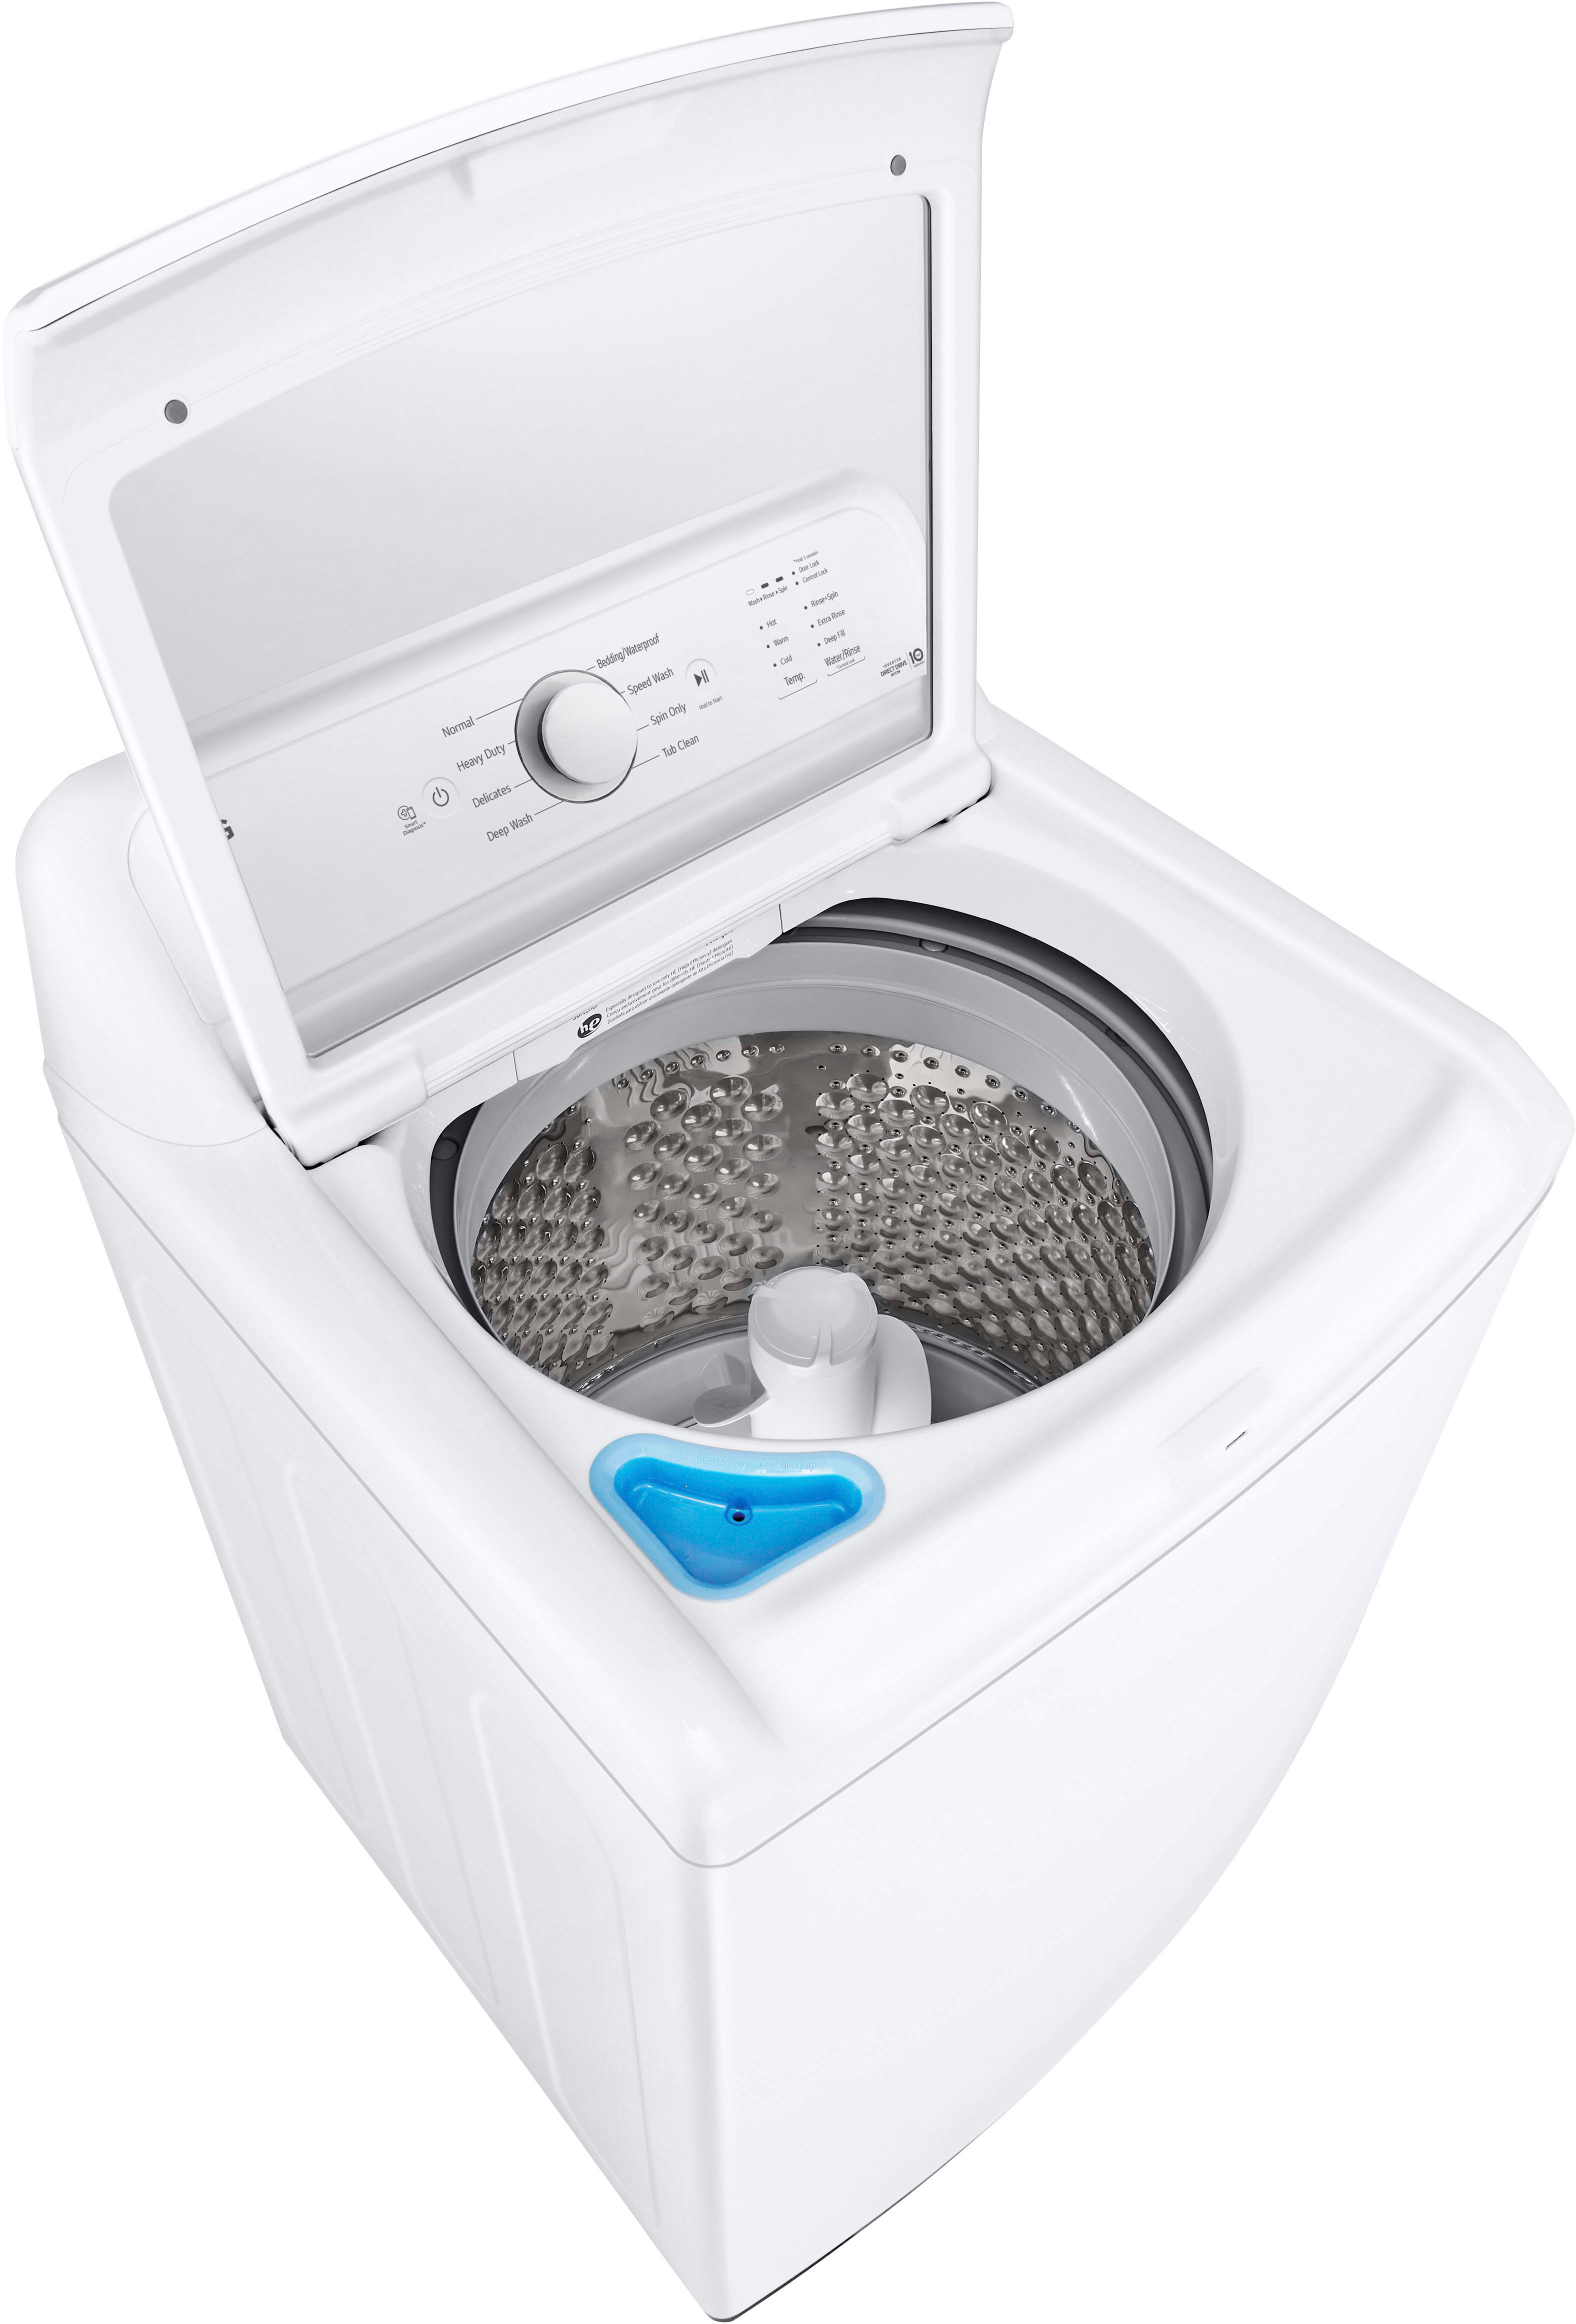 SlamProof Top with Best Washer Cu. - 4.1 LG Ft. White Load Glass Lid Buy WT6105CW